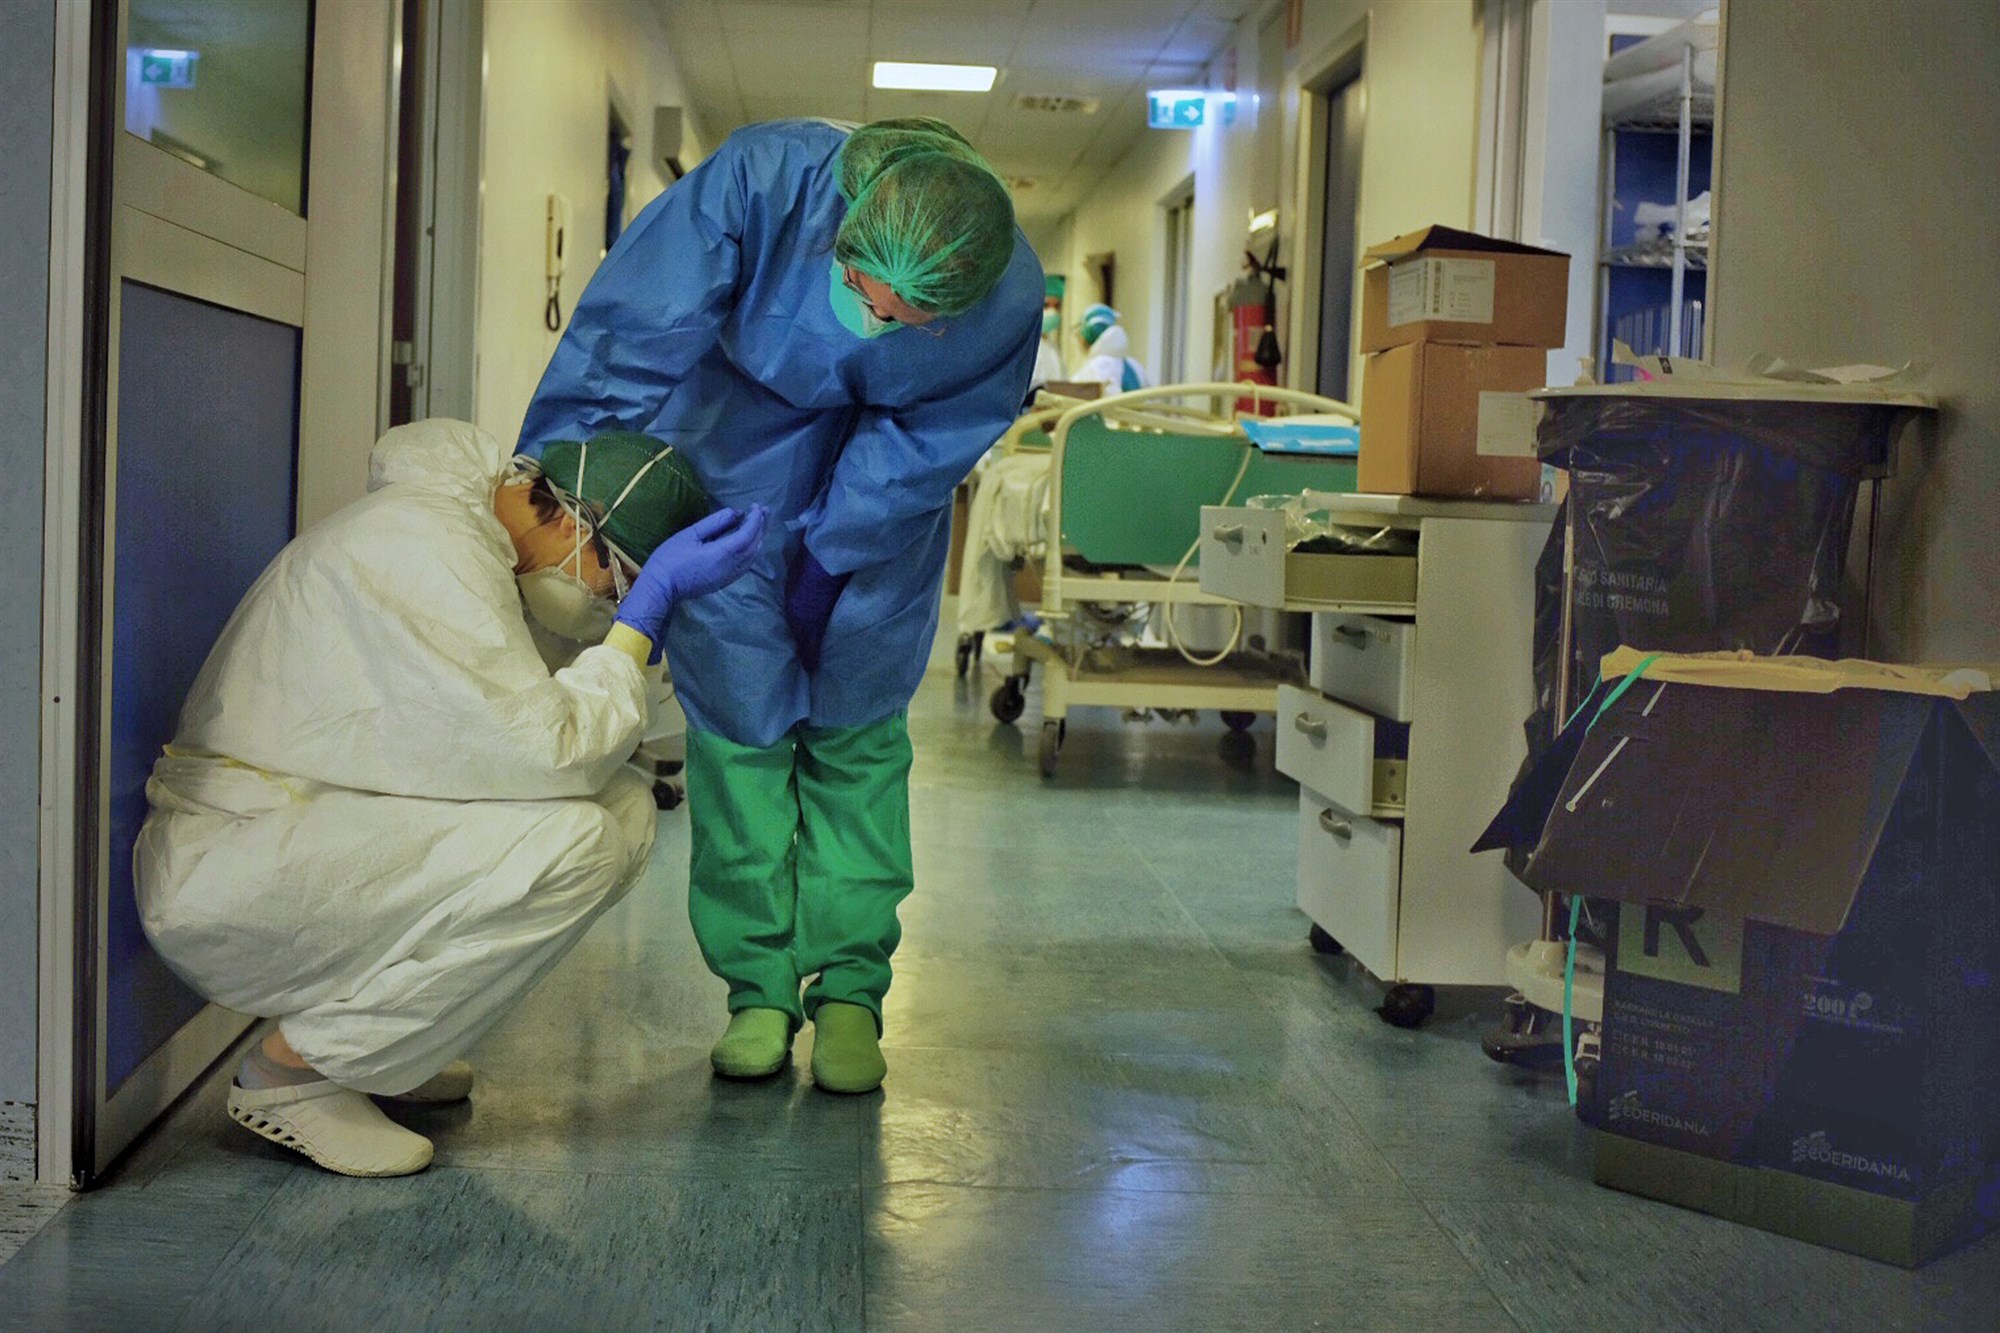 Two intensive care professionals comfort each other in the ICU of a hospital in Cremona, Italy , on Friday, March 13, 2020. (Photo: Paolo Miranda / NBC News) - Italian doctors article